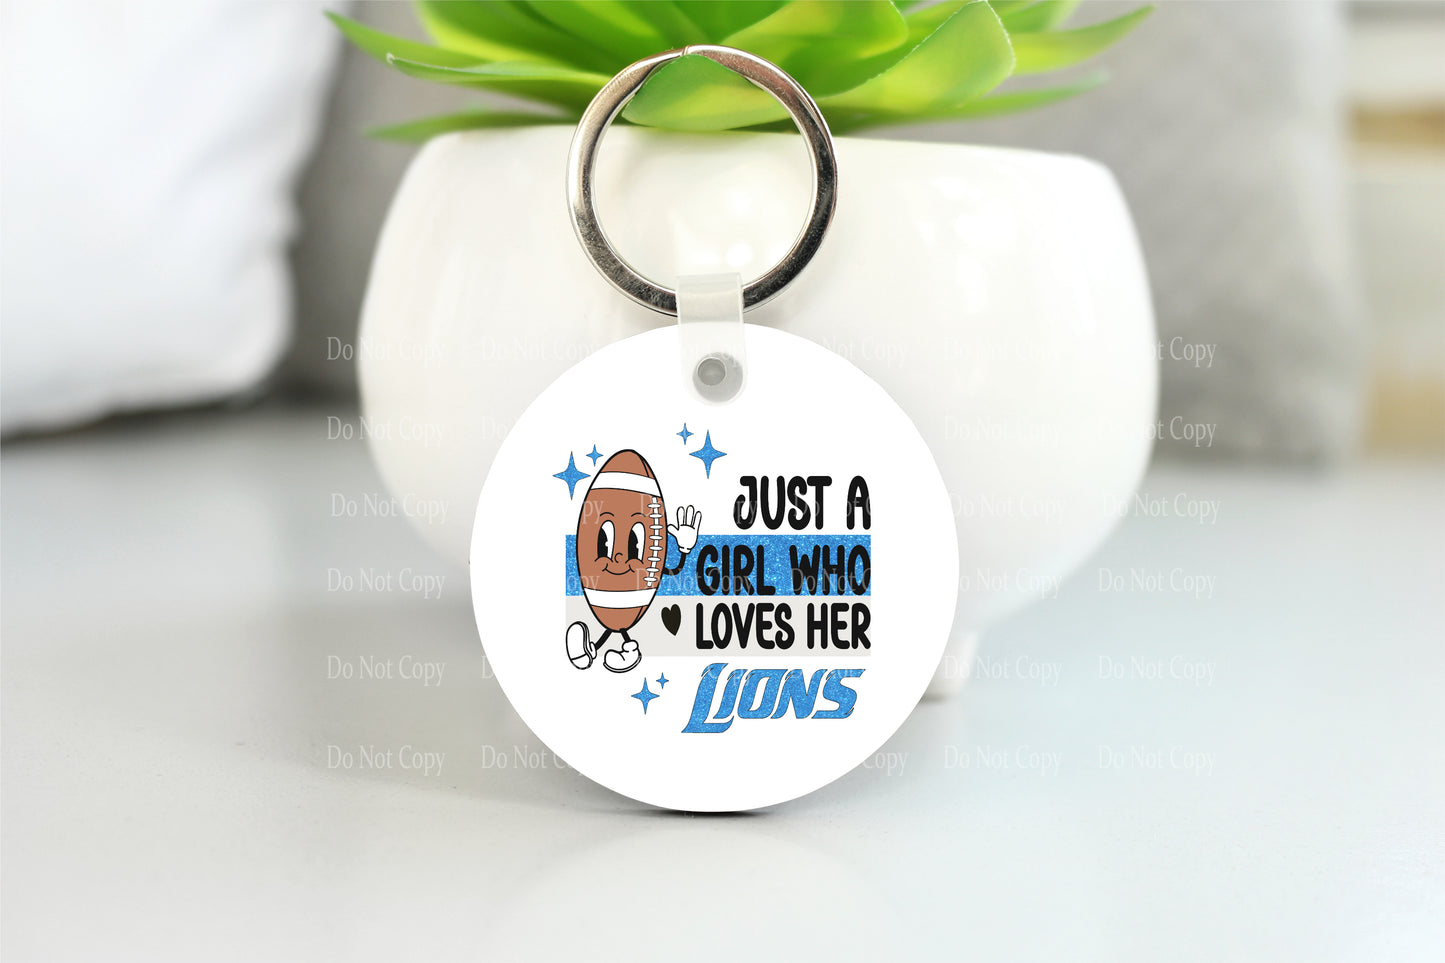 Just a girl who loves her Lions - Football Key Chain